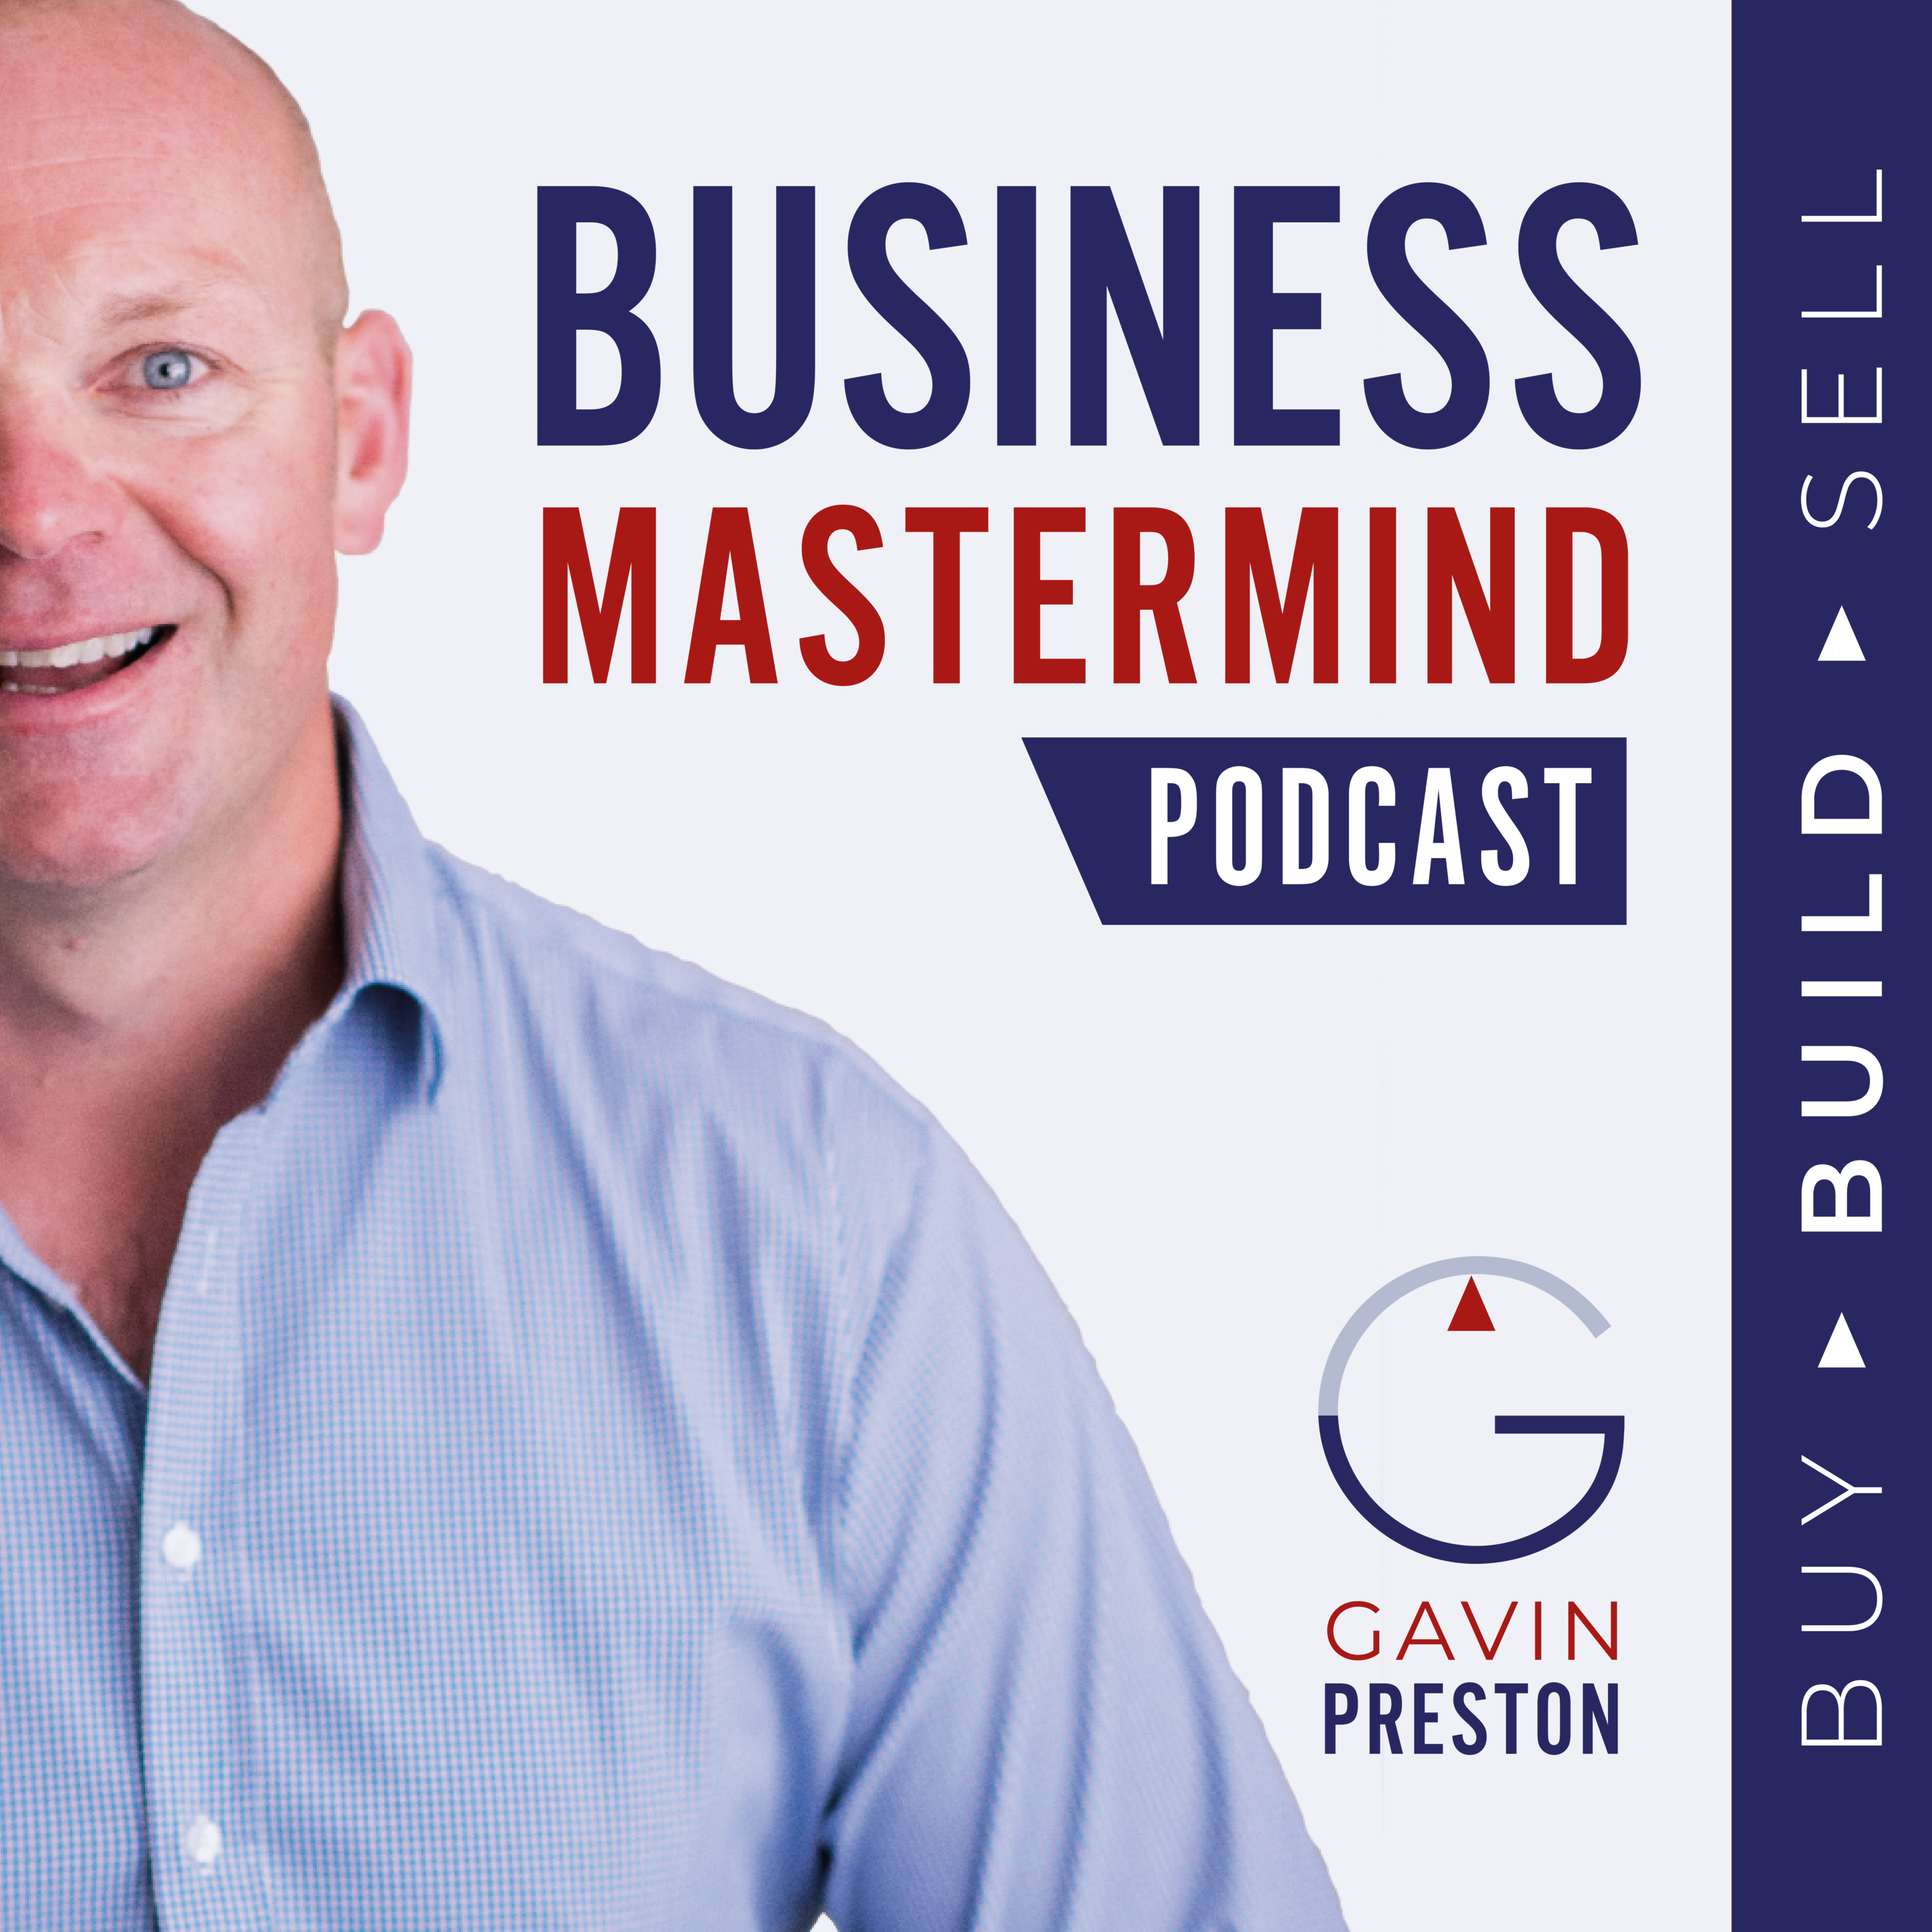 The Business Mastermind Podcast – Revive: Introducing results based pricing in your service business with Robin Waite